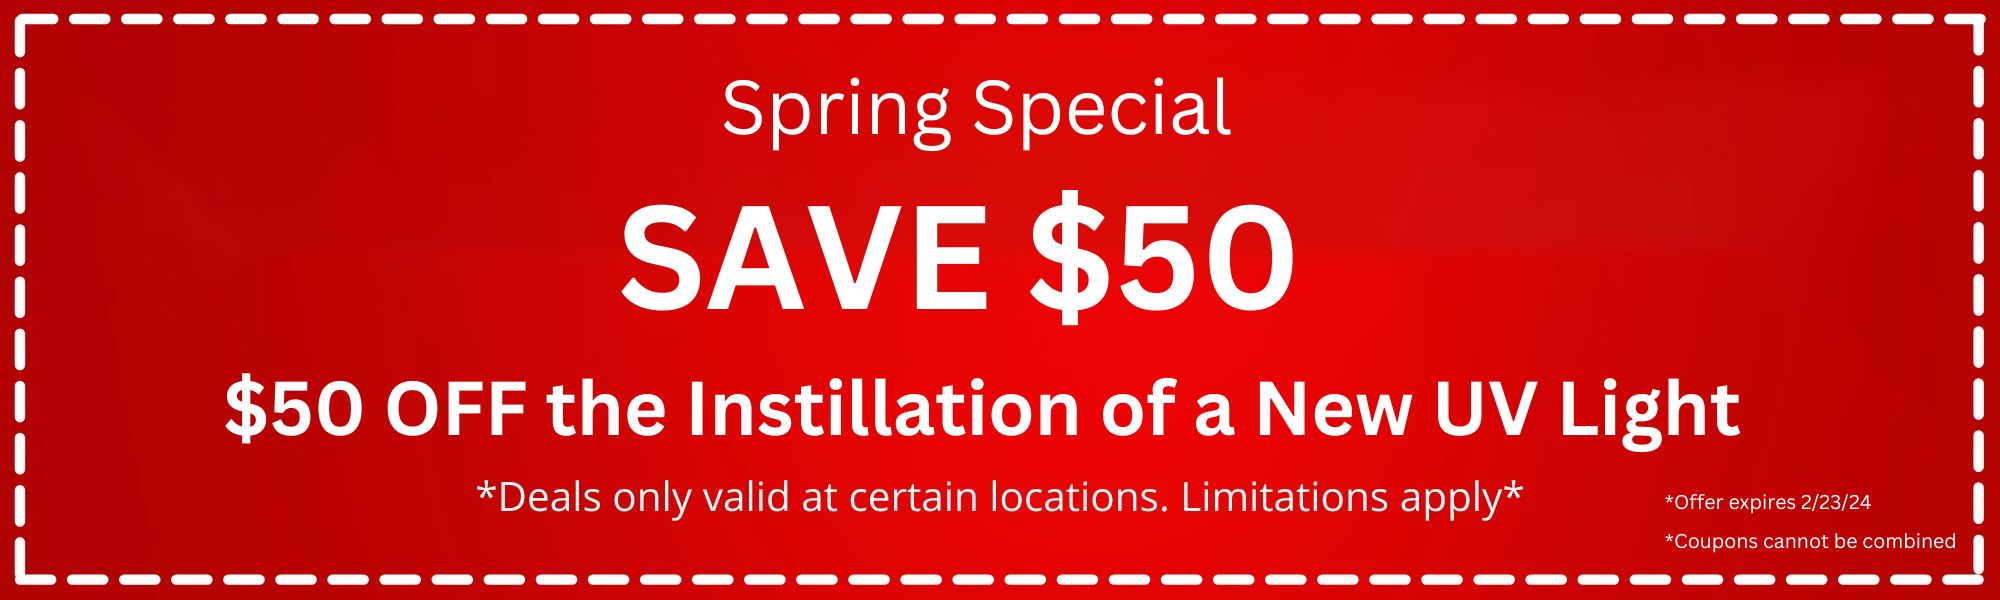 Spring Special: Save $50 off the installation of a new UV light. Deals only valid at certain locations. Limitations apply. Offer expires 2/23/24. Coupons cannot be combined.